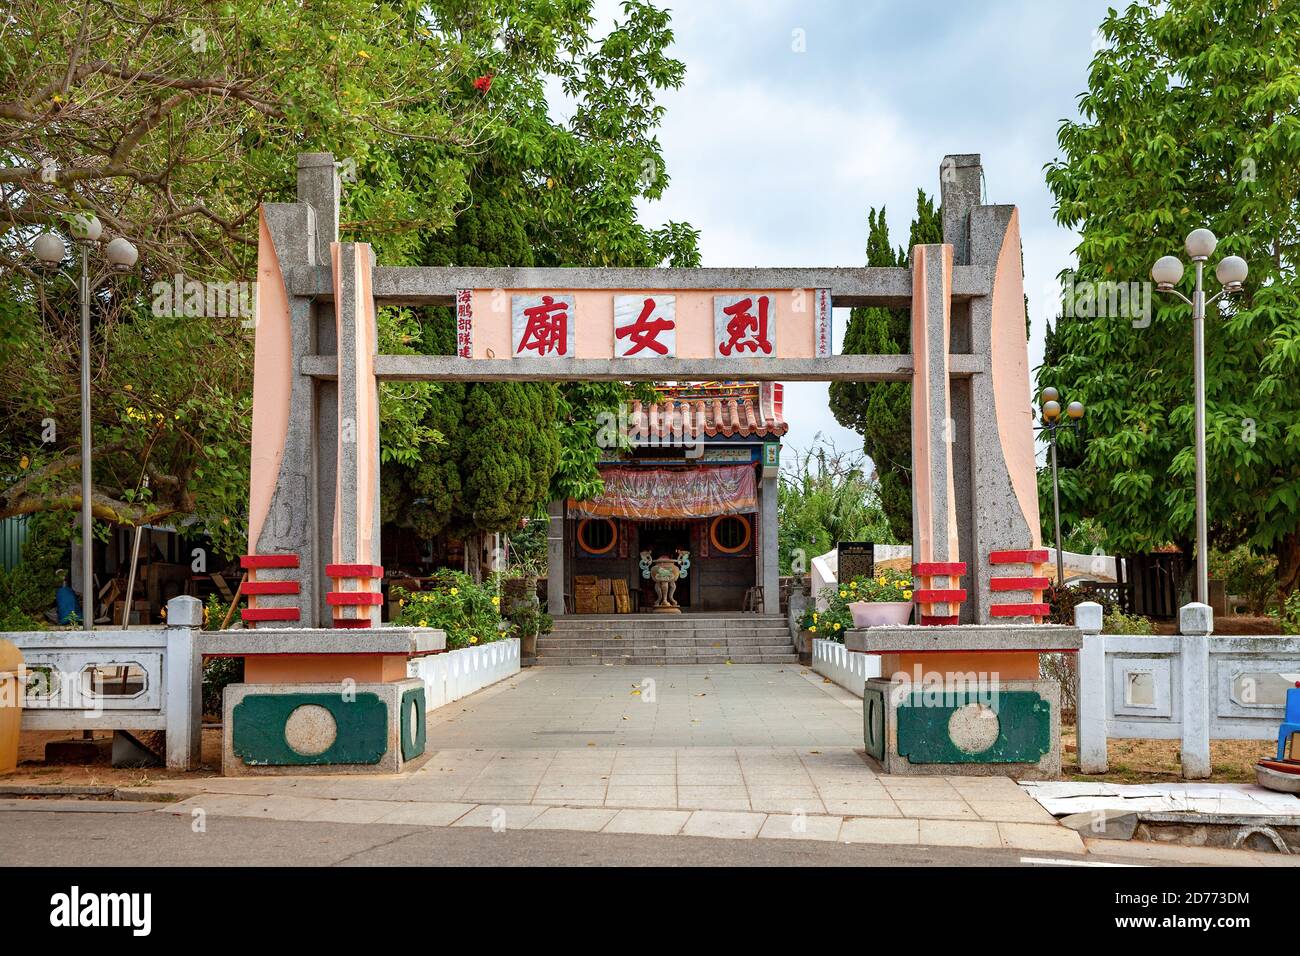 Chaste Maiden Temple in Kinmen, Taiwan.  The chinese text is 'Chaste Maiden Temple' Stock Photo